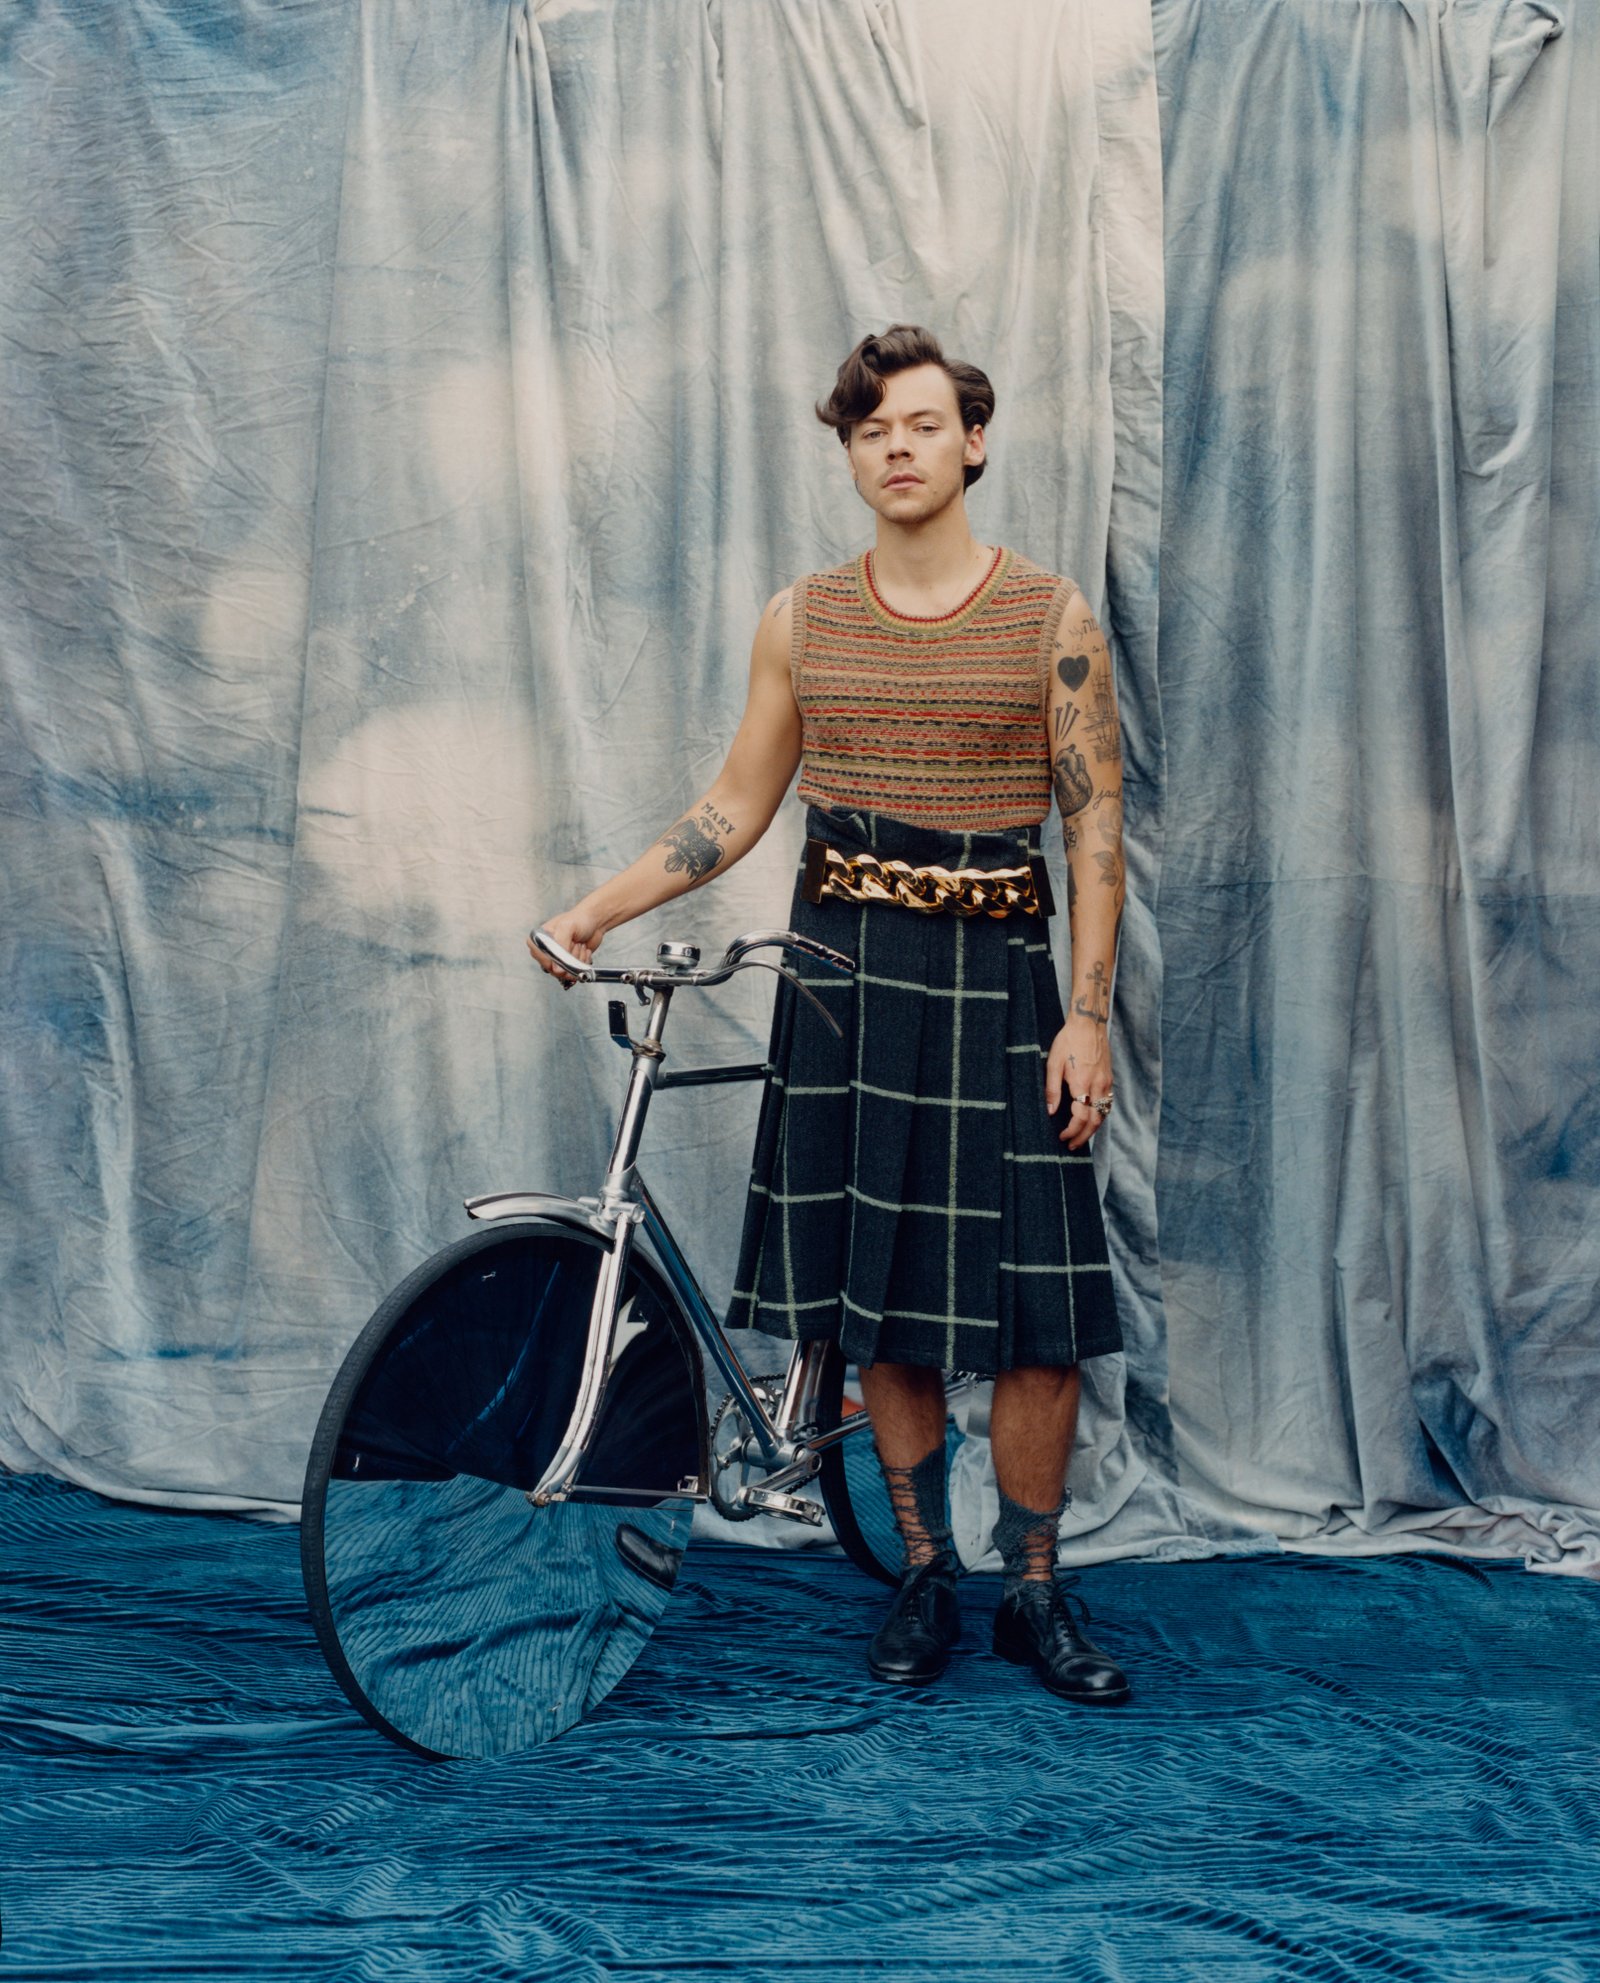 Harry Styles in a kilt for Vogue.